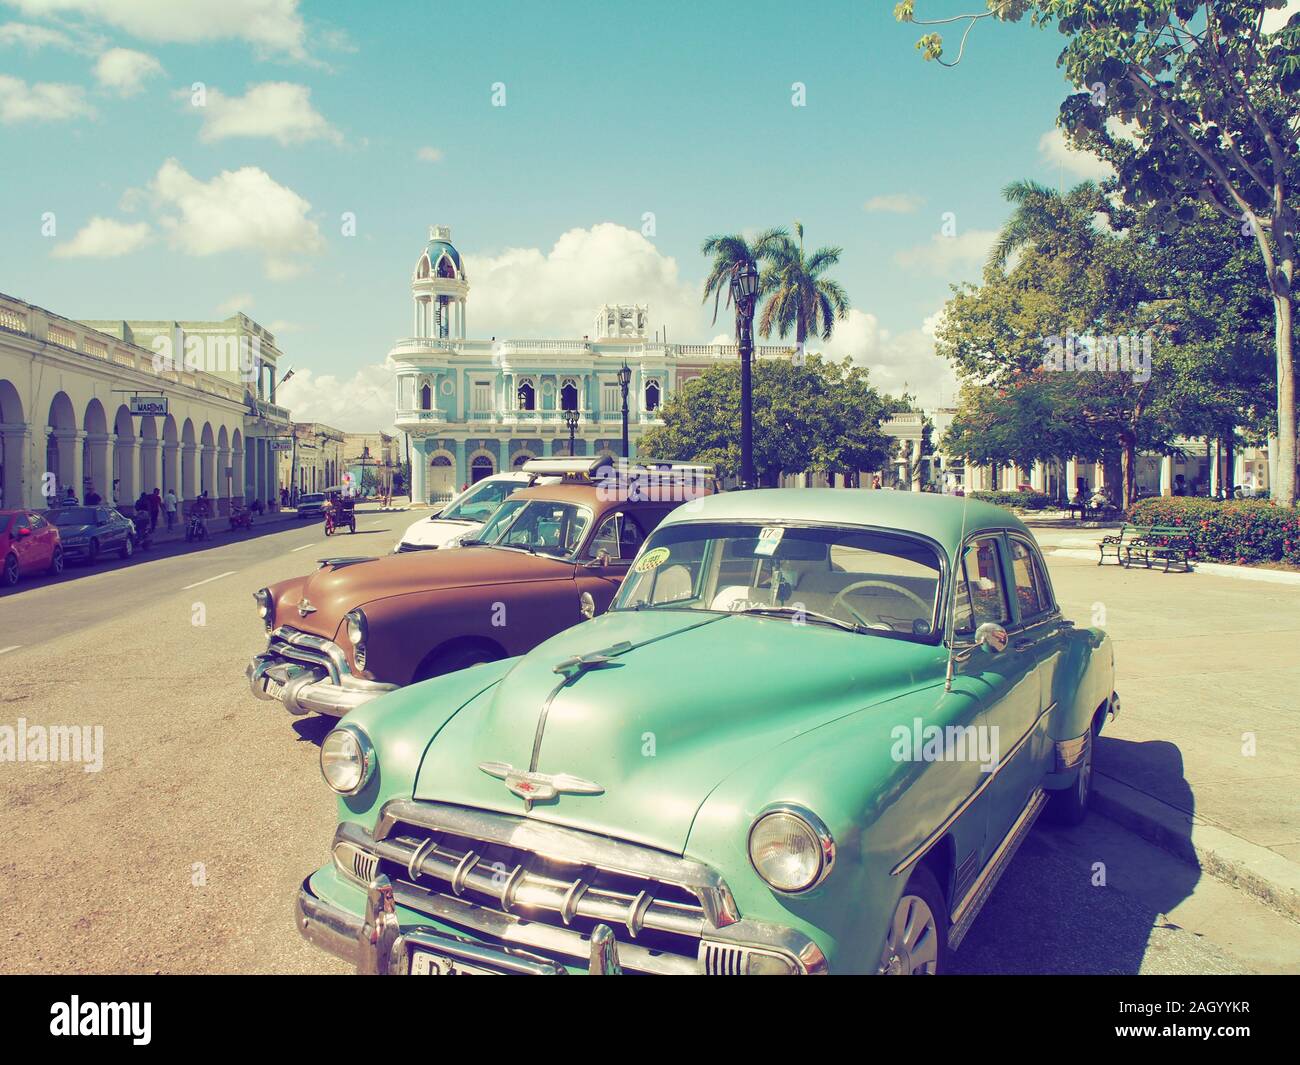 Oldtimer and Classic Cars in the Caribbean Stock Photo